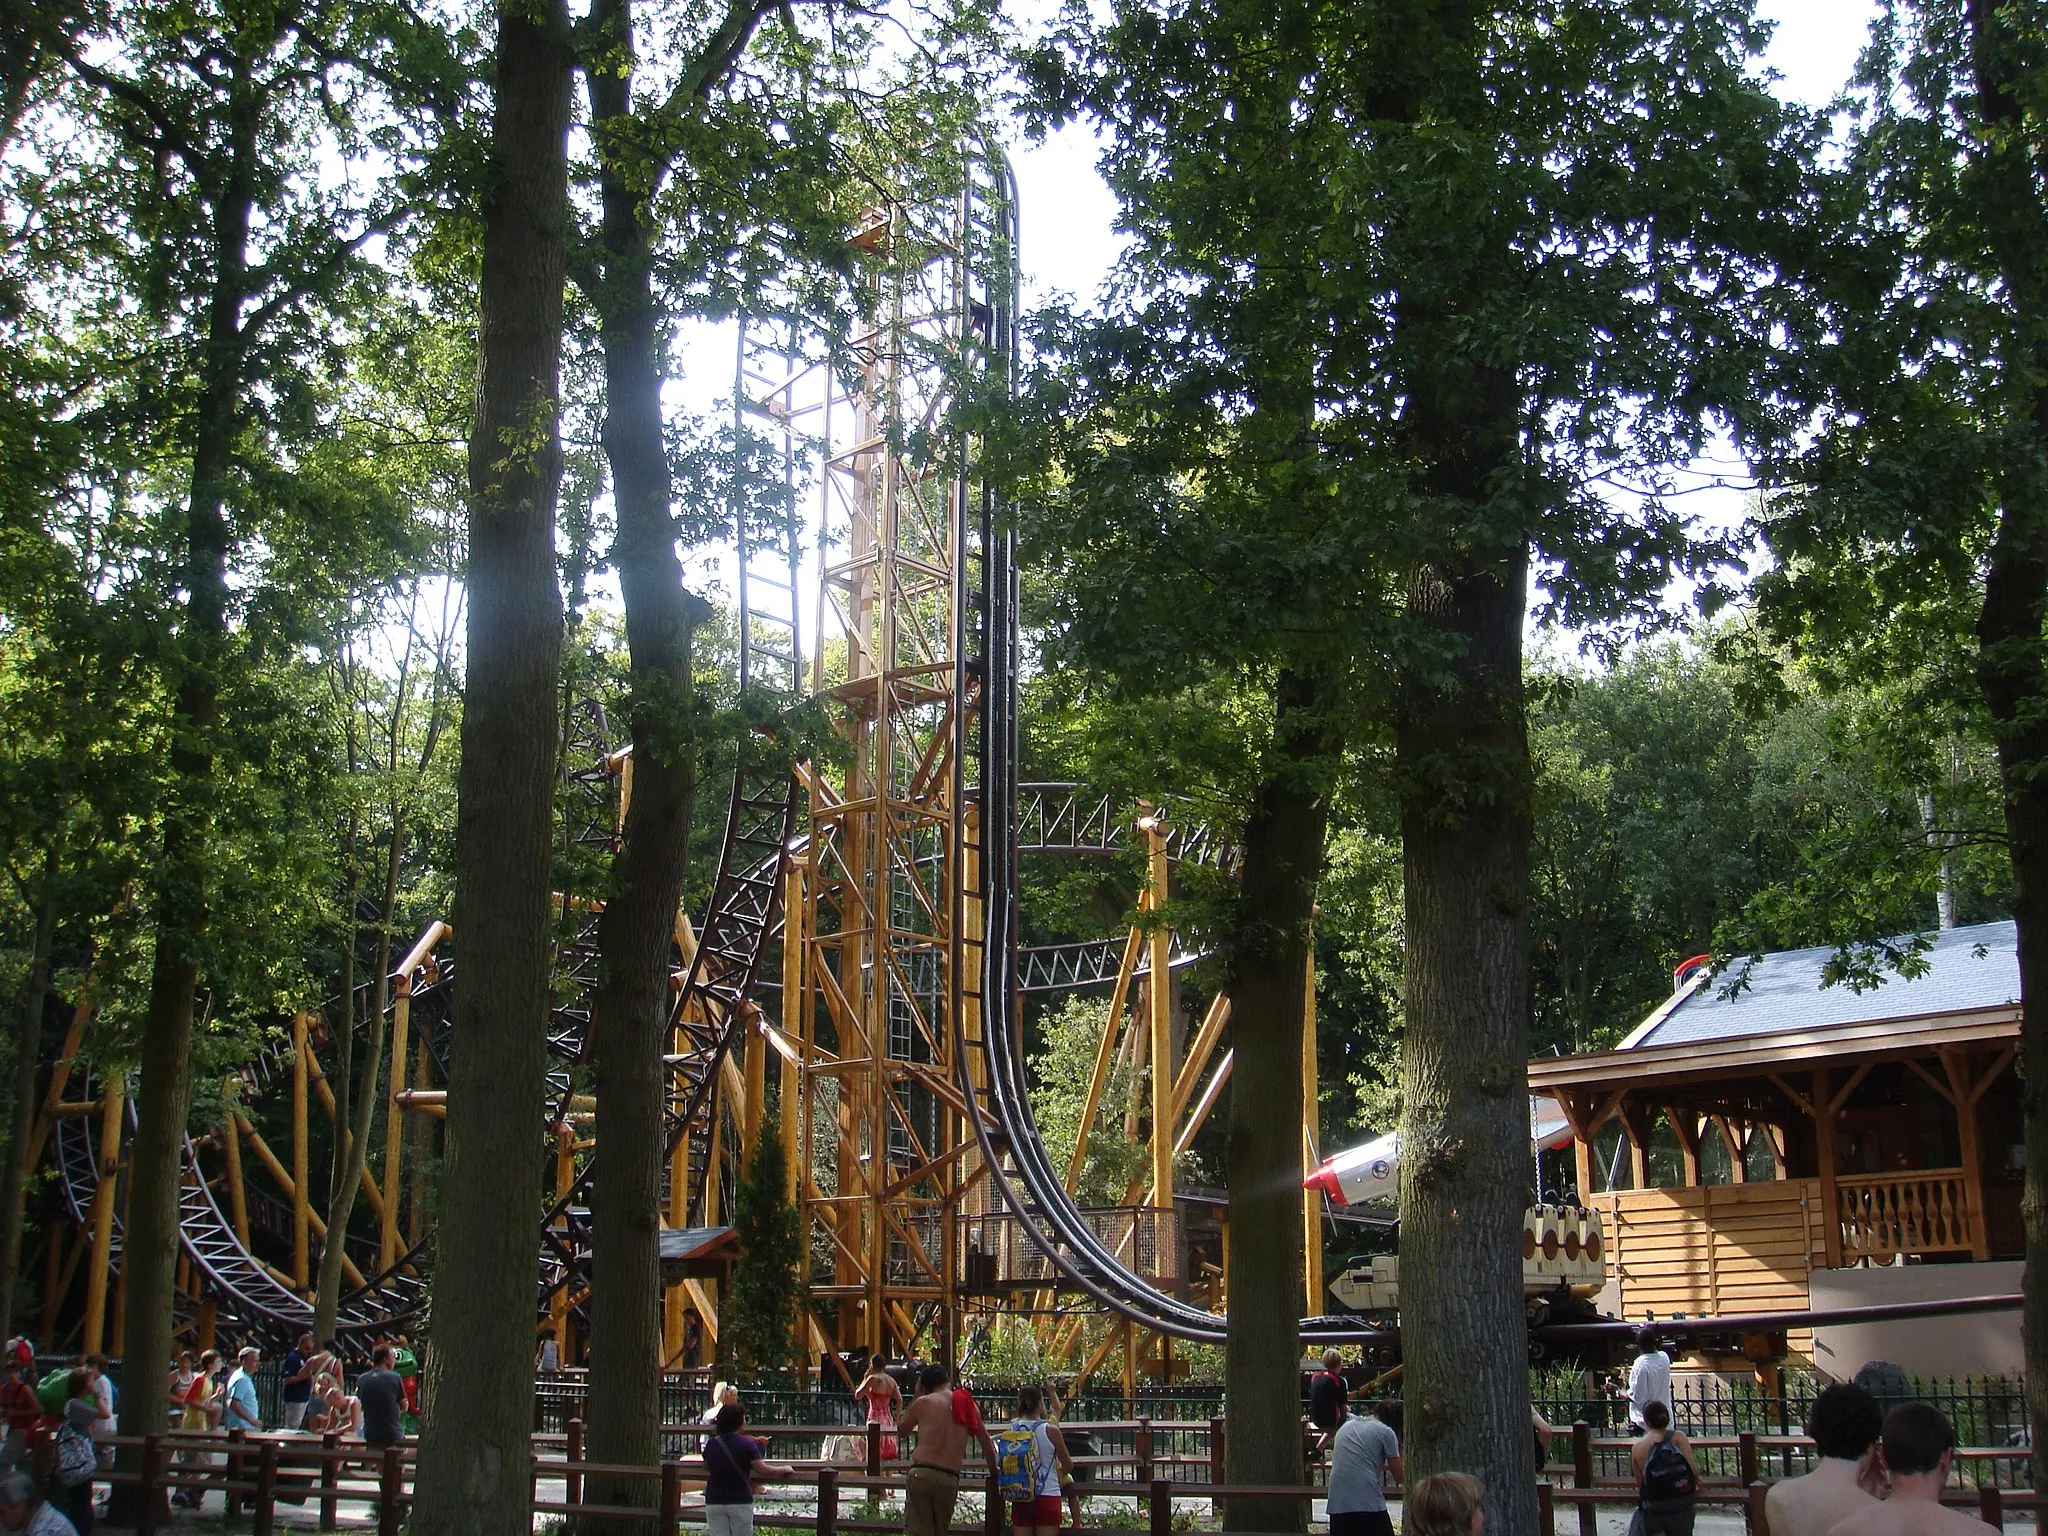 Photo showing: The roller coaster "Falcon" in the Dutch amusement park Duinrell.